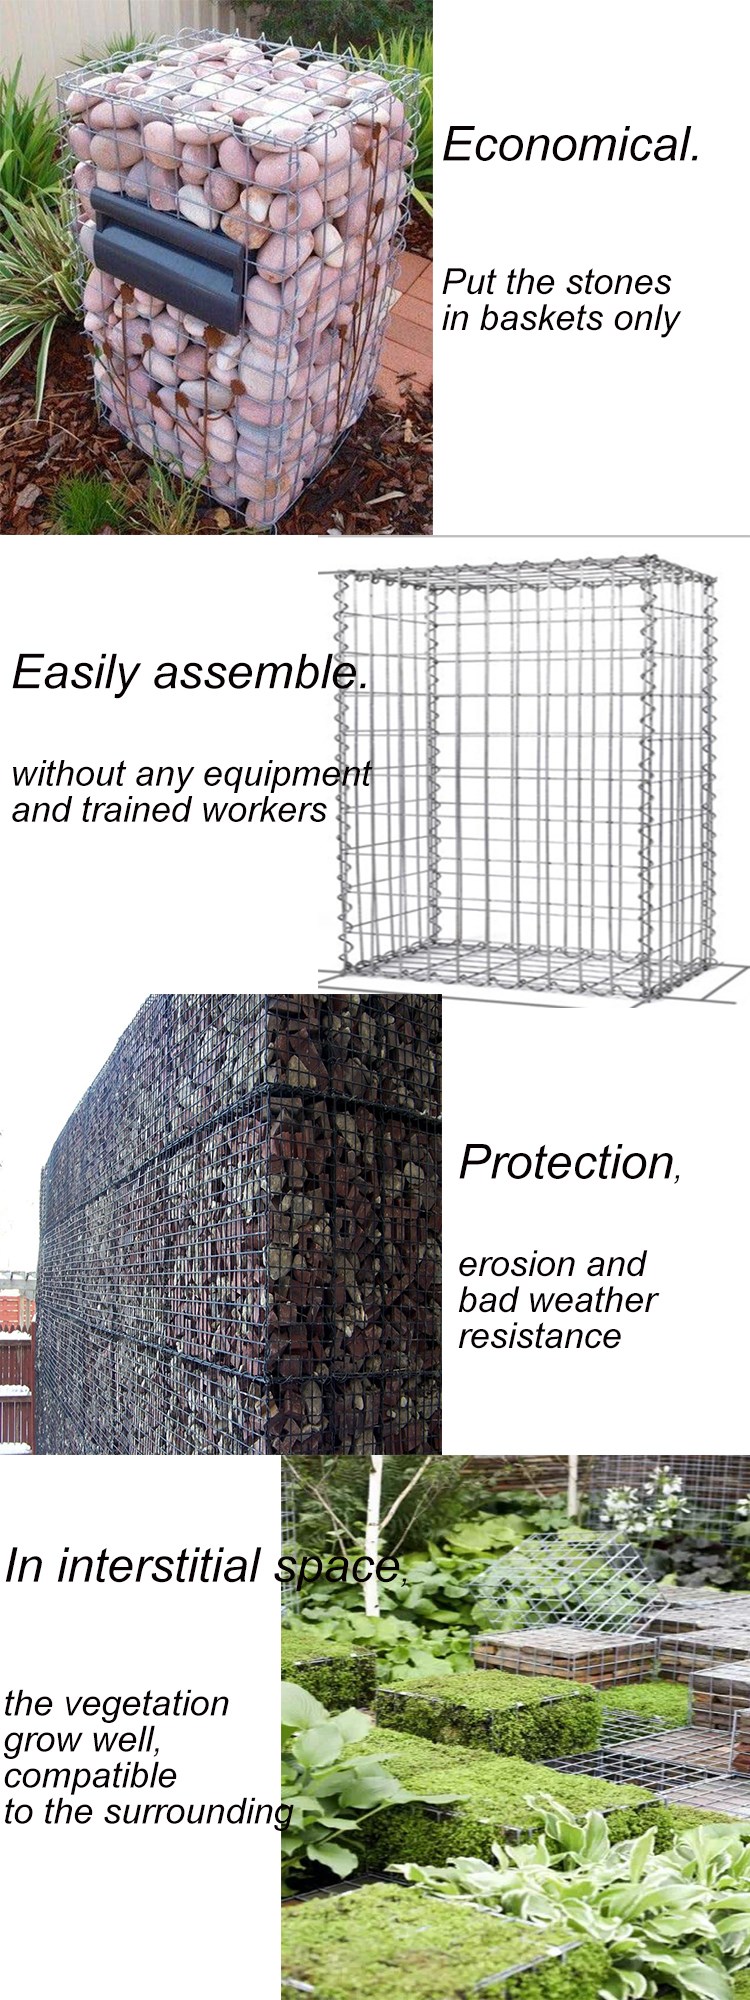 Welded wire rope mesh gabion bastio and hesco barrier in chinese market